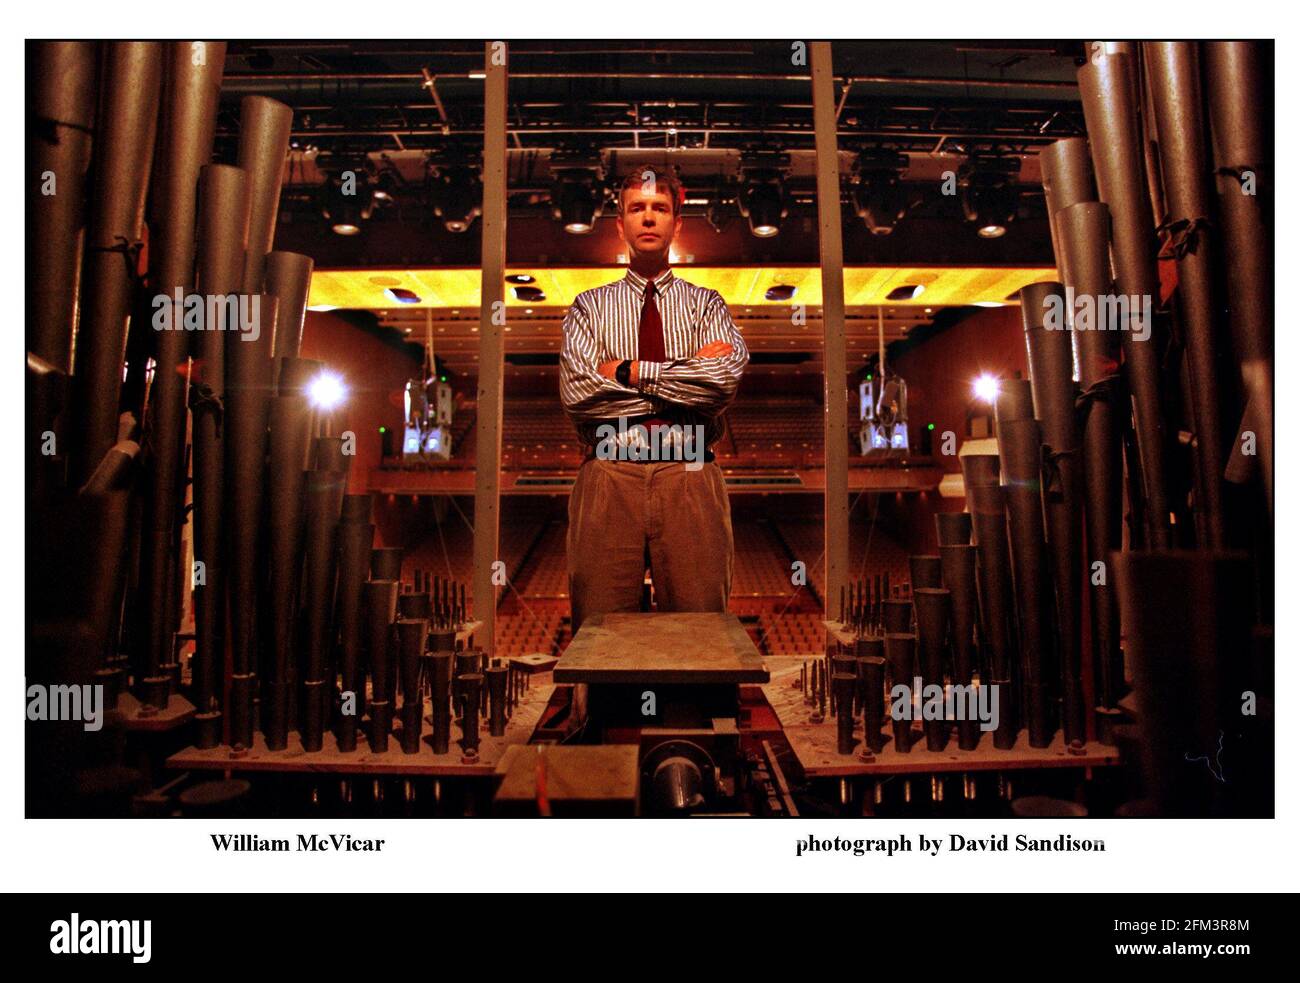 William McVicar in amongst the pipes of the Royal Festival Hall organ.    photograph by David Sandison 14/10/99 Stock Photo